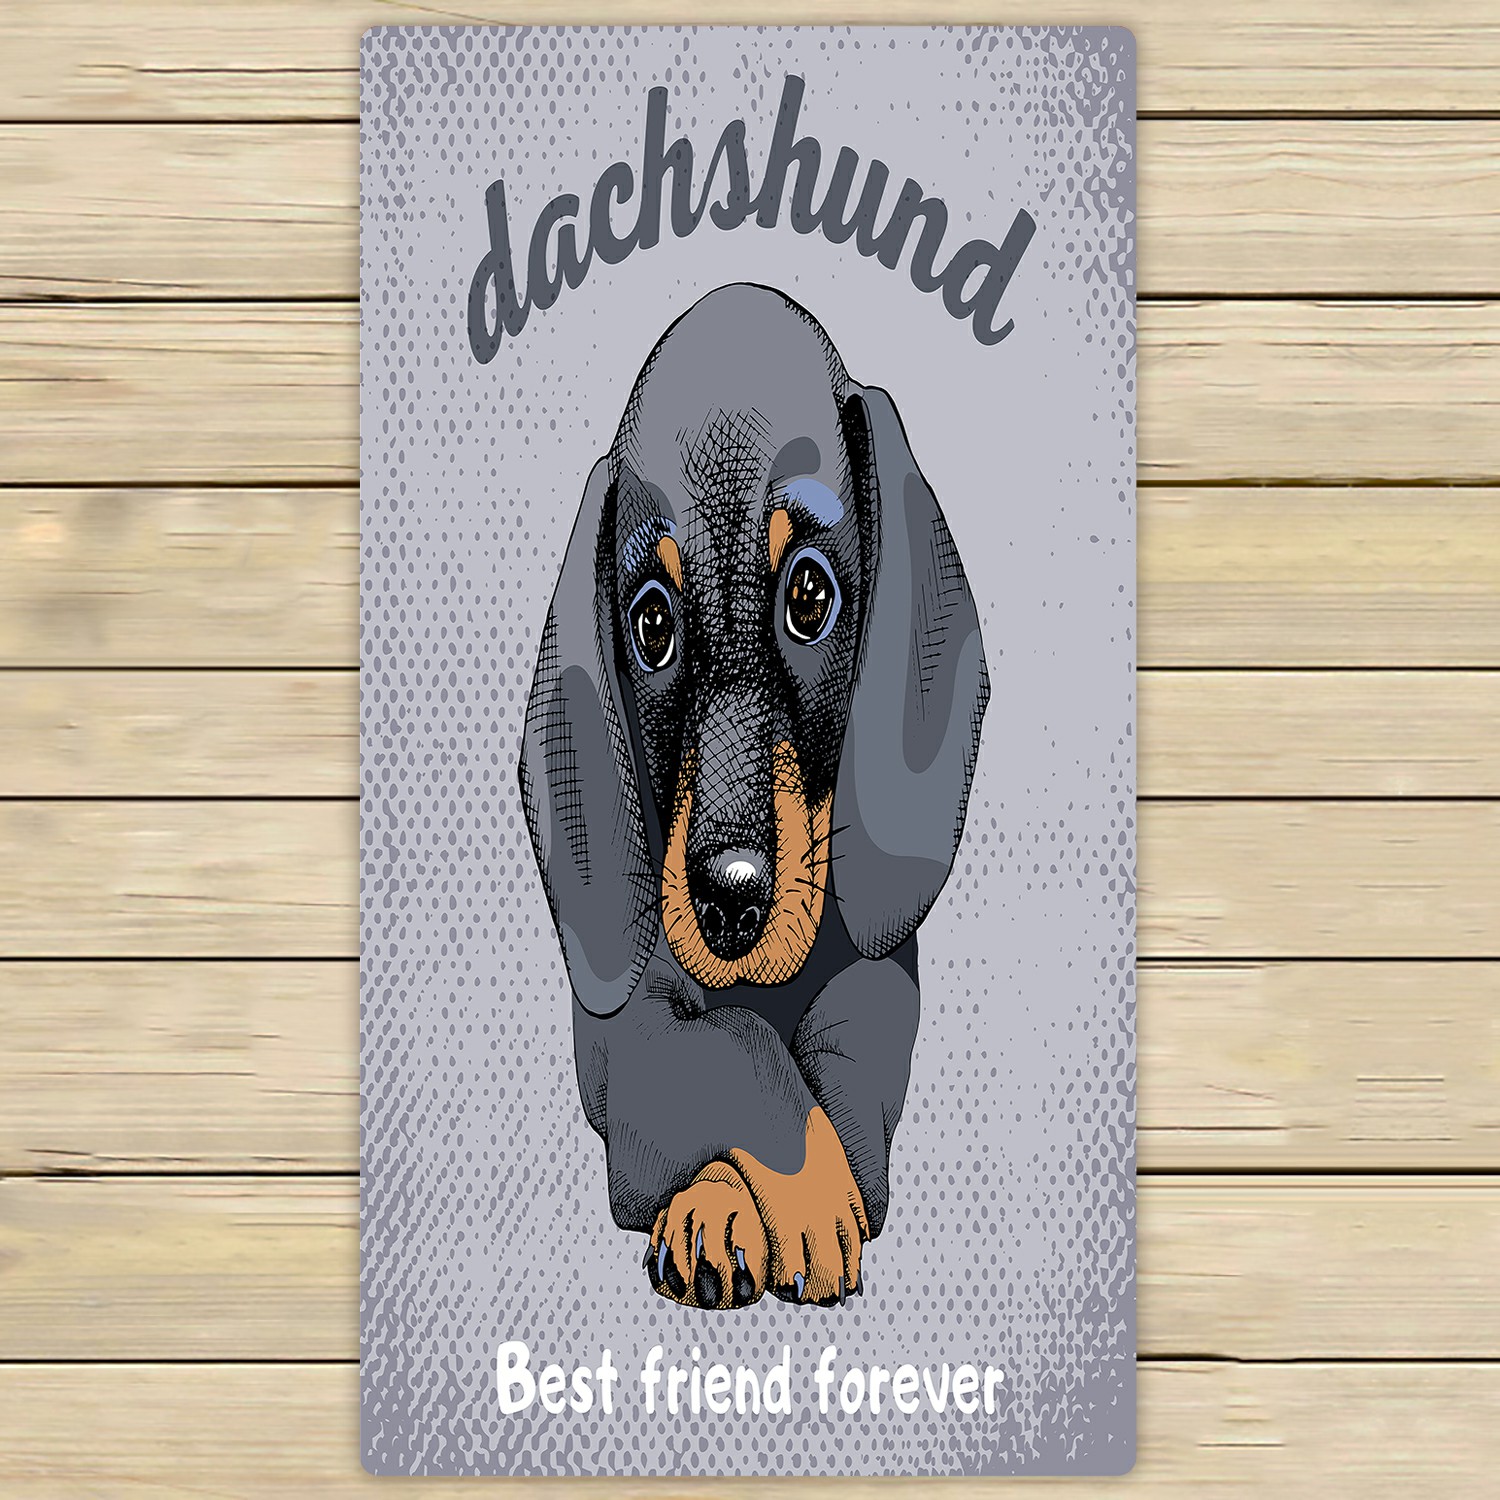 30 X 16 Inch Blue Boy Doxie Dog Dachshund Hand Towels Towel Ultra Soft Highly Absorbent Multipurpose Bathroom Bath Kitchen Fingertip Towel for Hand,Face,Gym,Spa and Home Decor